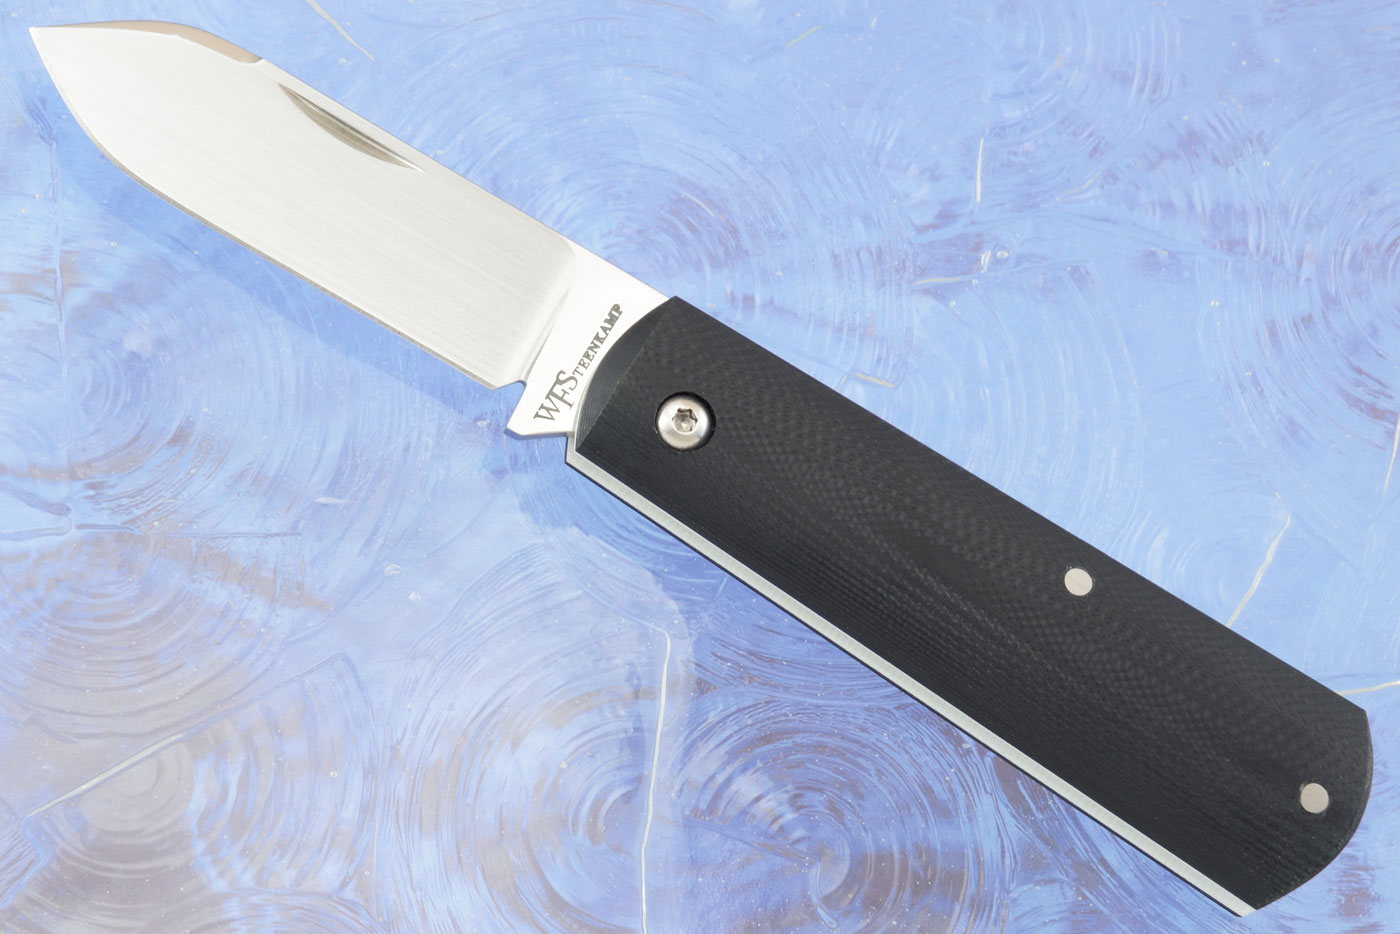 Barlow Friction Folder with Black and White G10